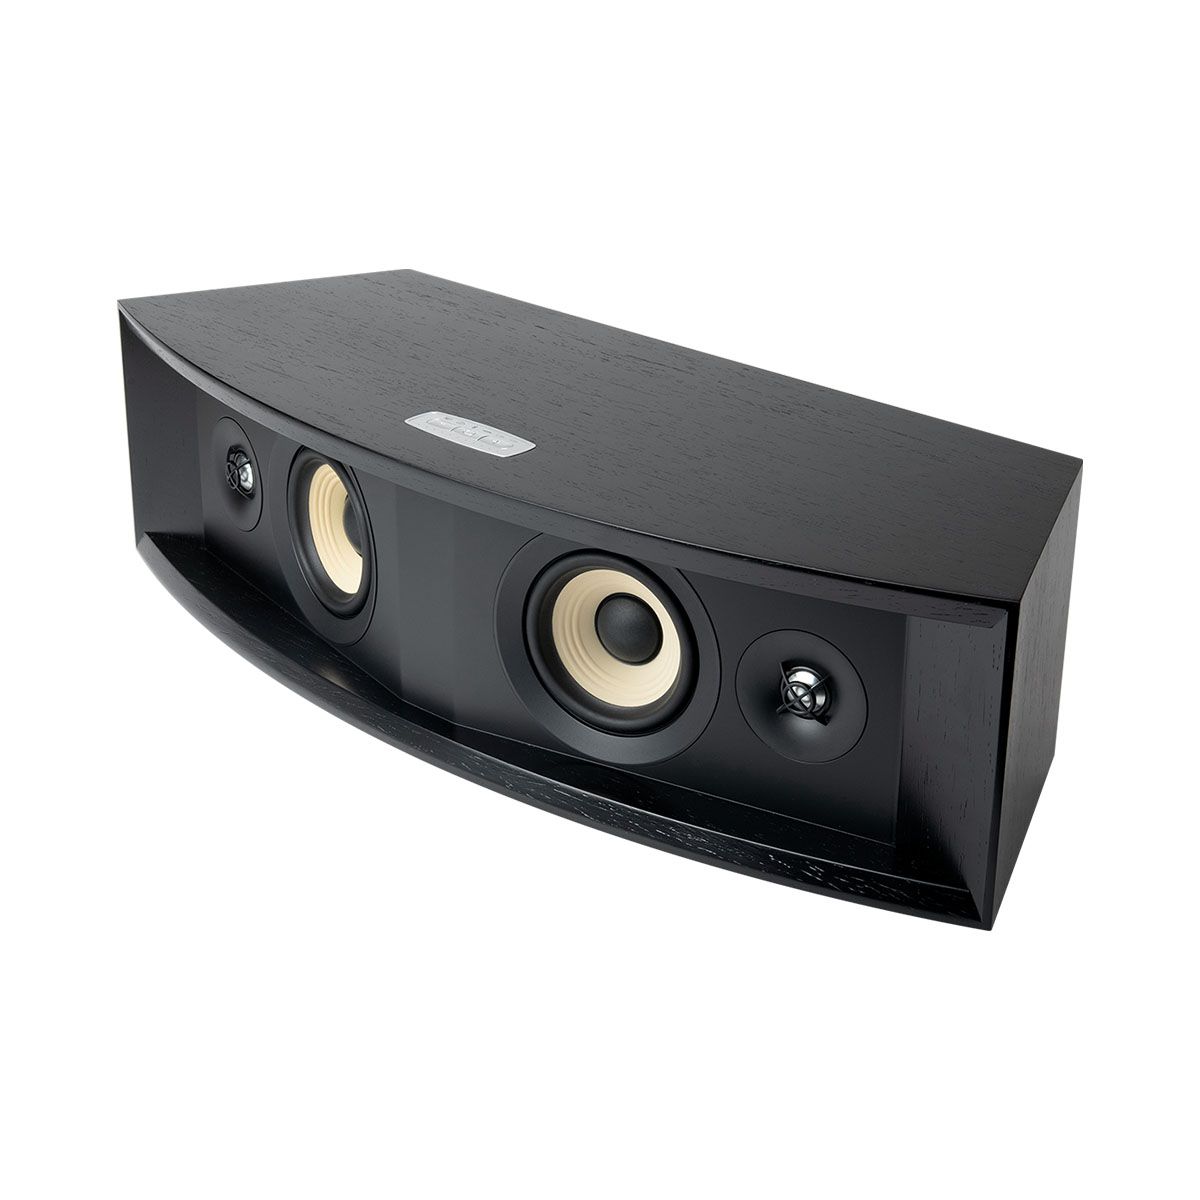 JBL L42ms Integrated Music System - Black Walnut angled front view without grille